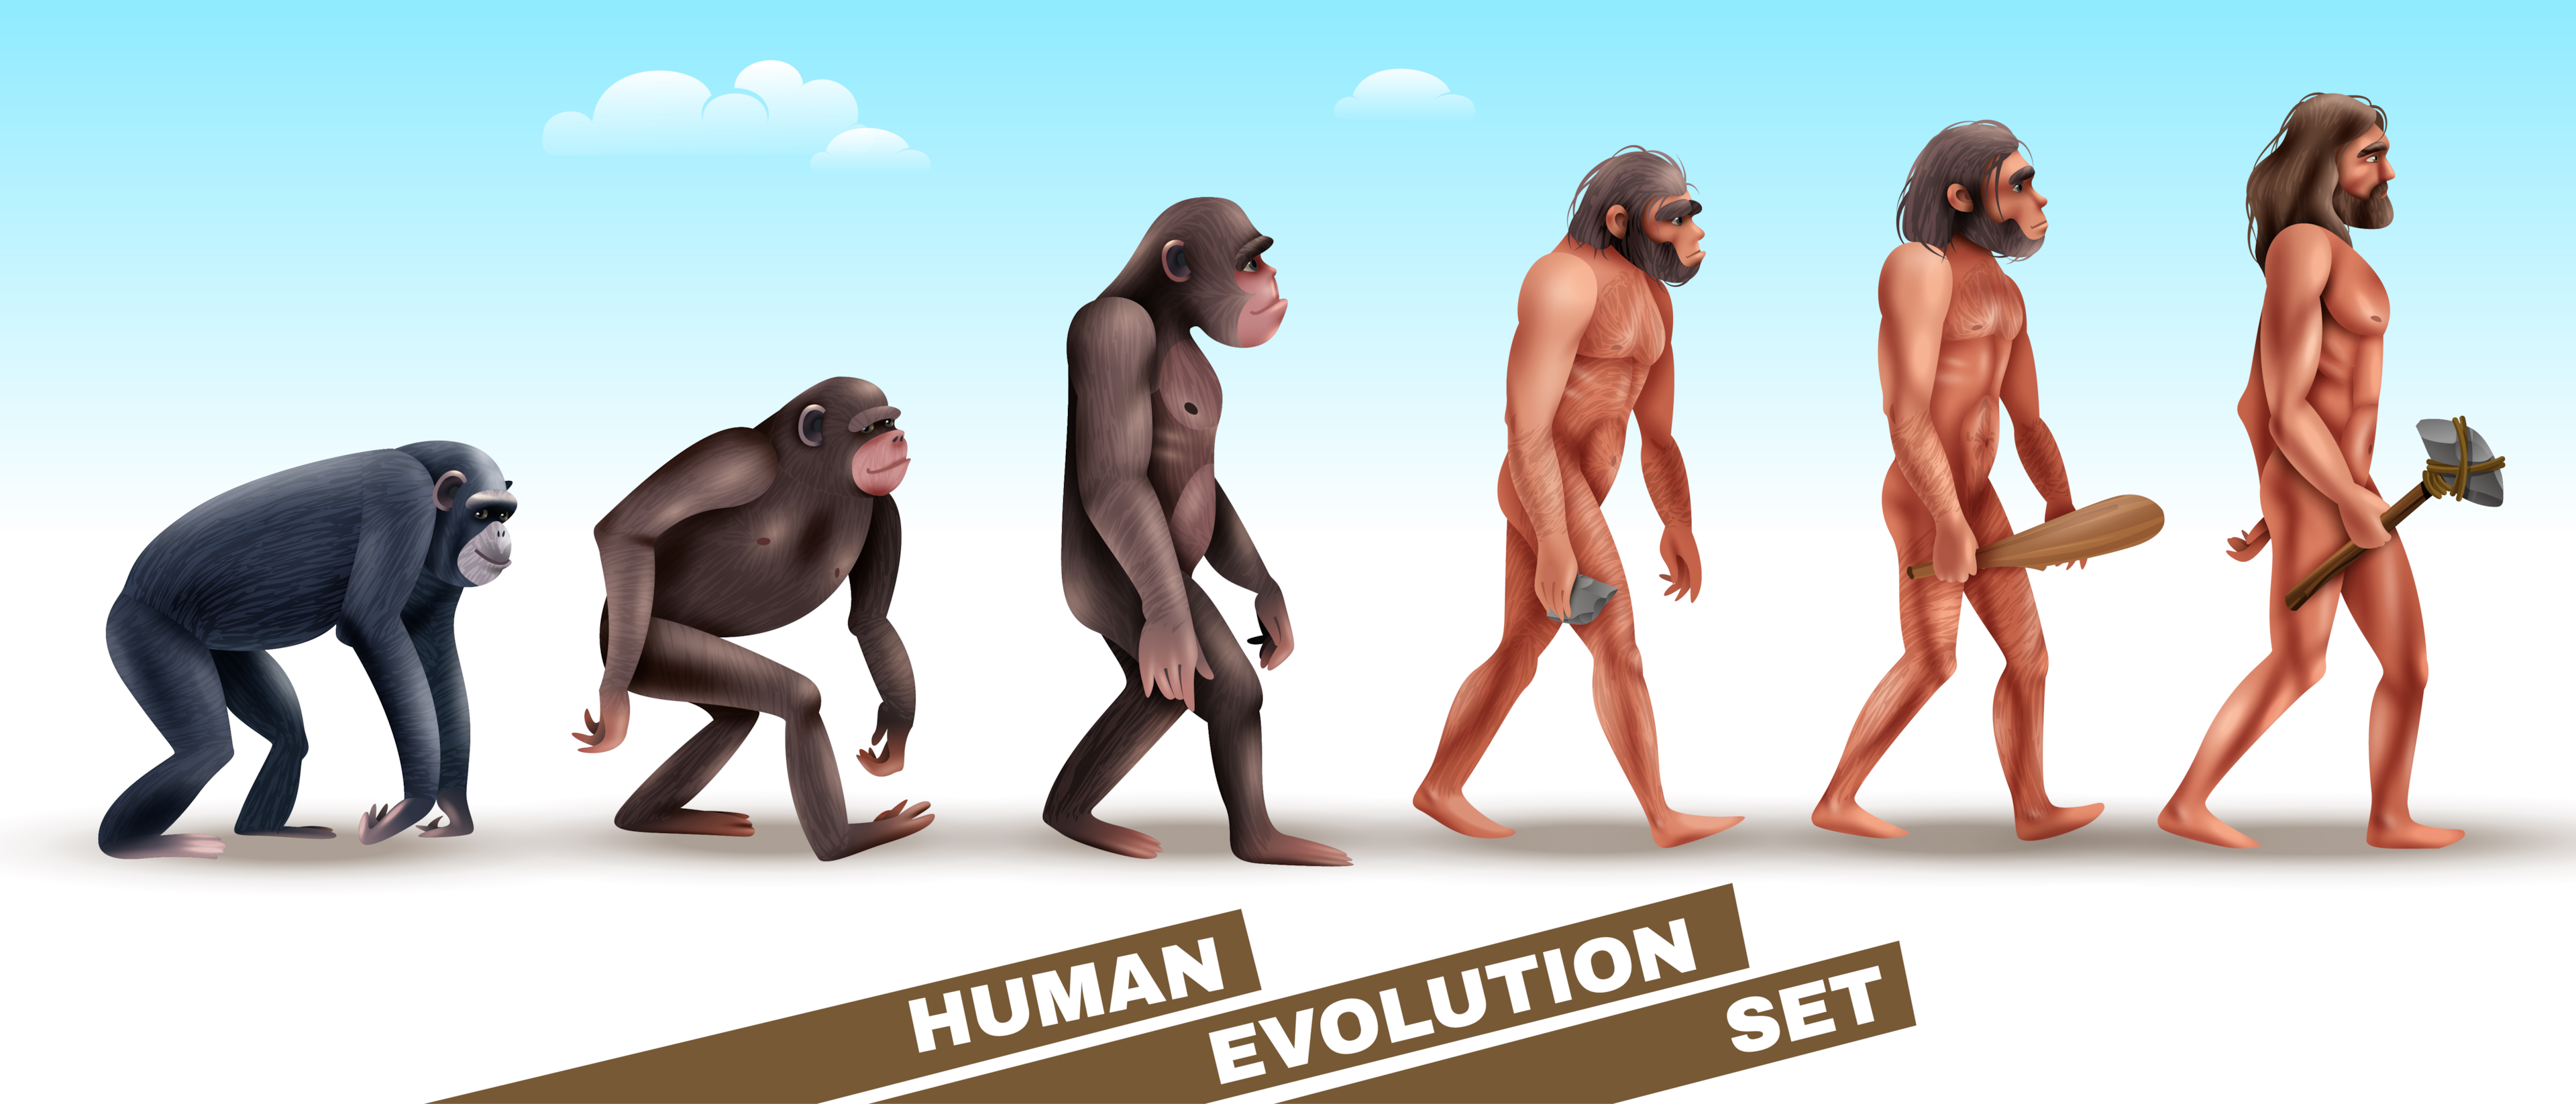 The human penis evolved slowly with human evolution.